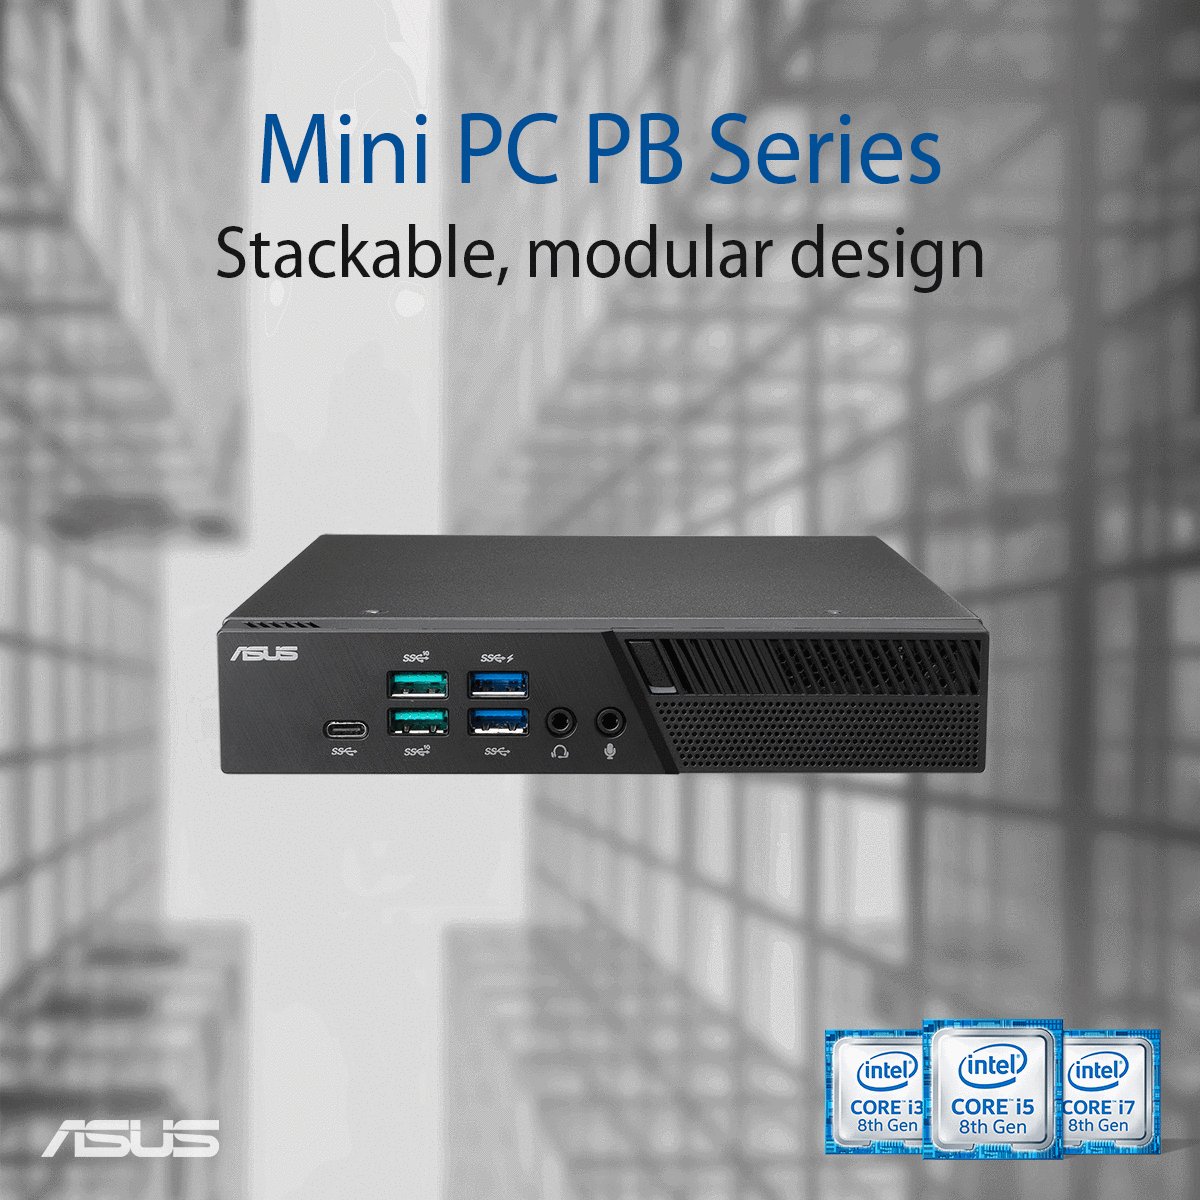 ASUS on Twitter: "The new ASUS Mini PC PB60V Intel® vPro™ technology, offering easier, more efficient remote IT management, reducing total cost of ownership, while providing enhanced security. #PBseries Learn